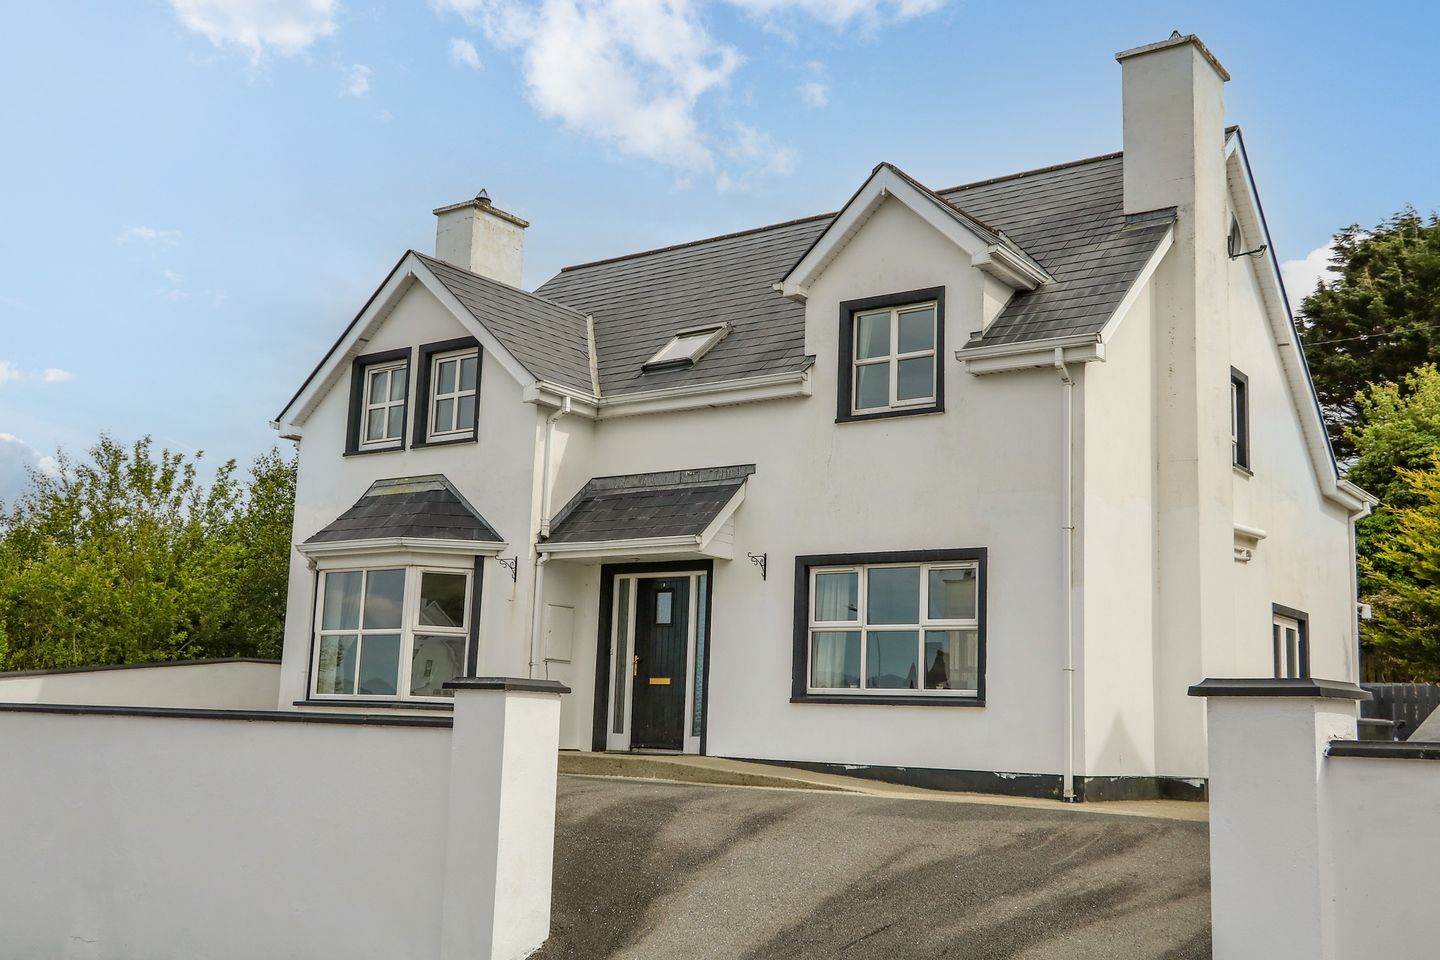 Ref. 1109418 12 Hillview, 12 Hillview, Ludden, Bun, Donegal Town, Co. Donegal